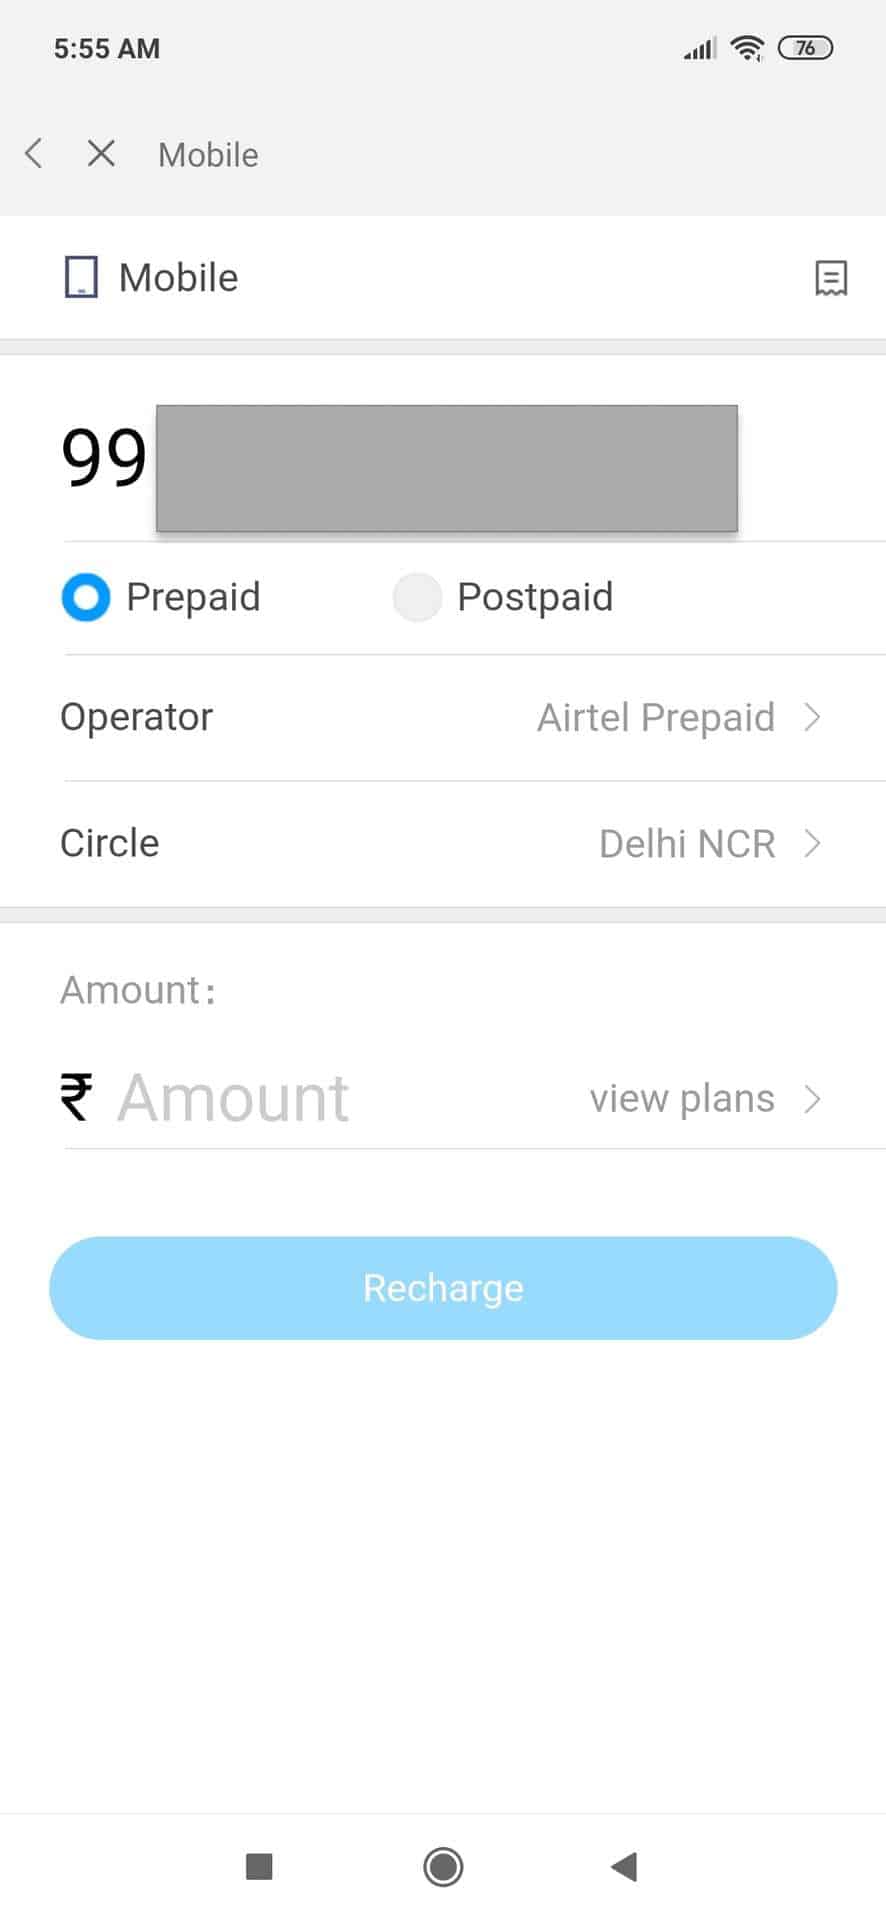 Mi Pay mobile recharge